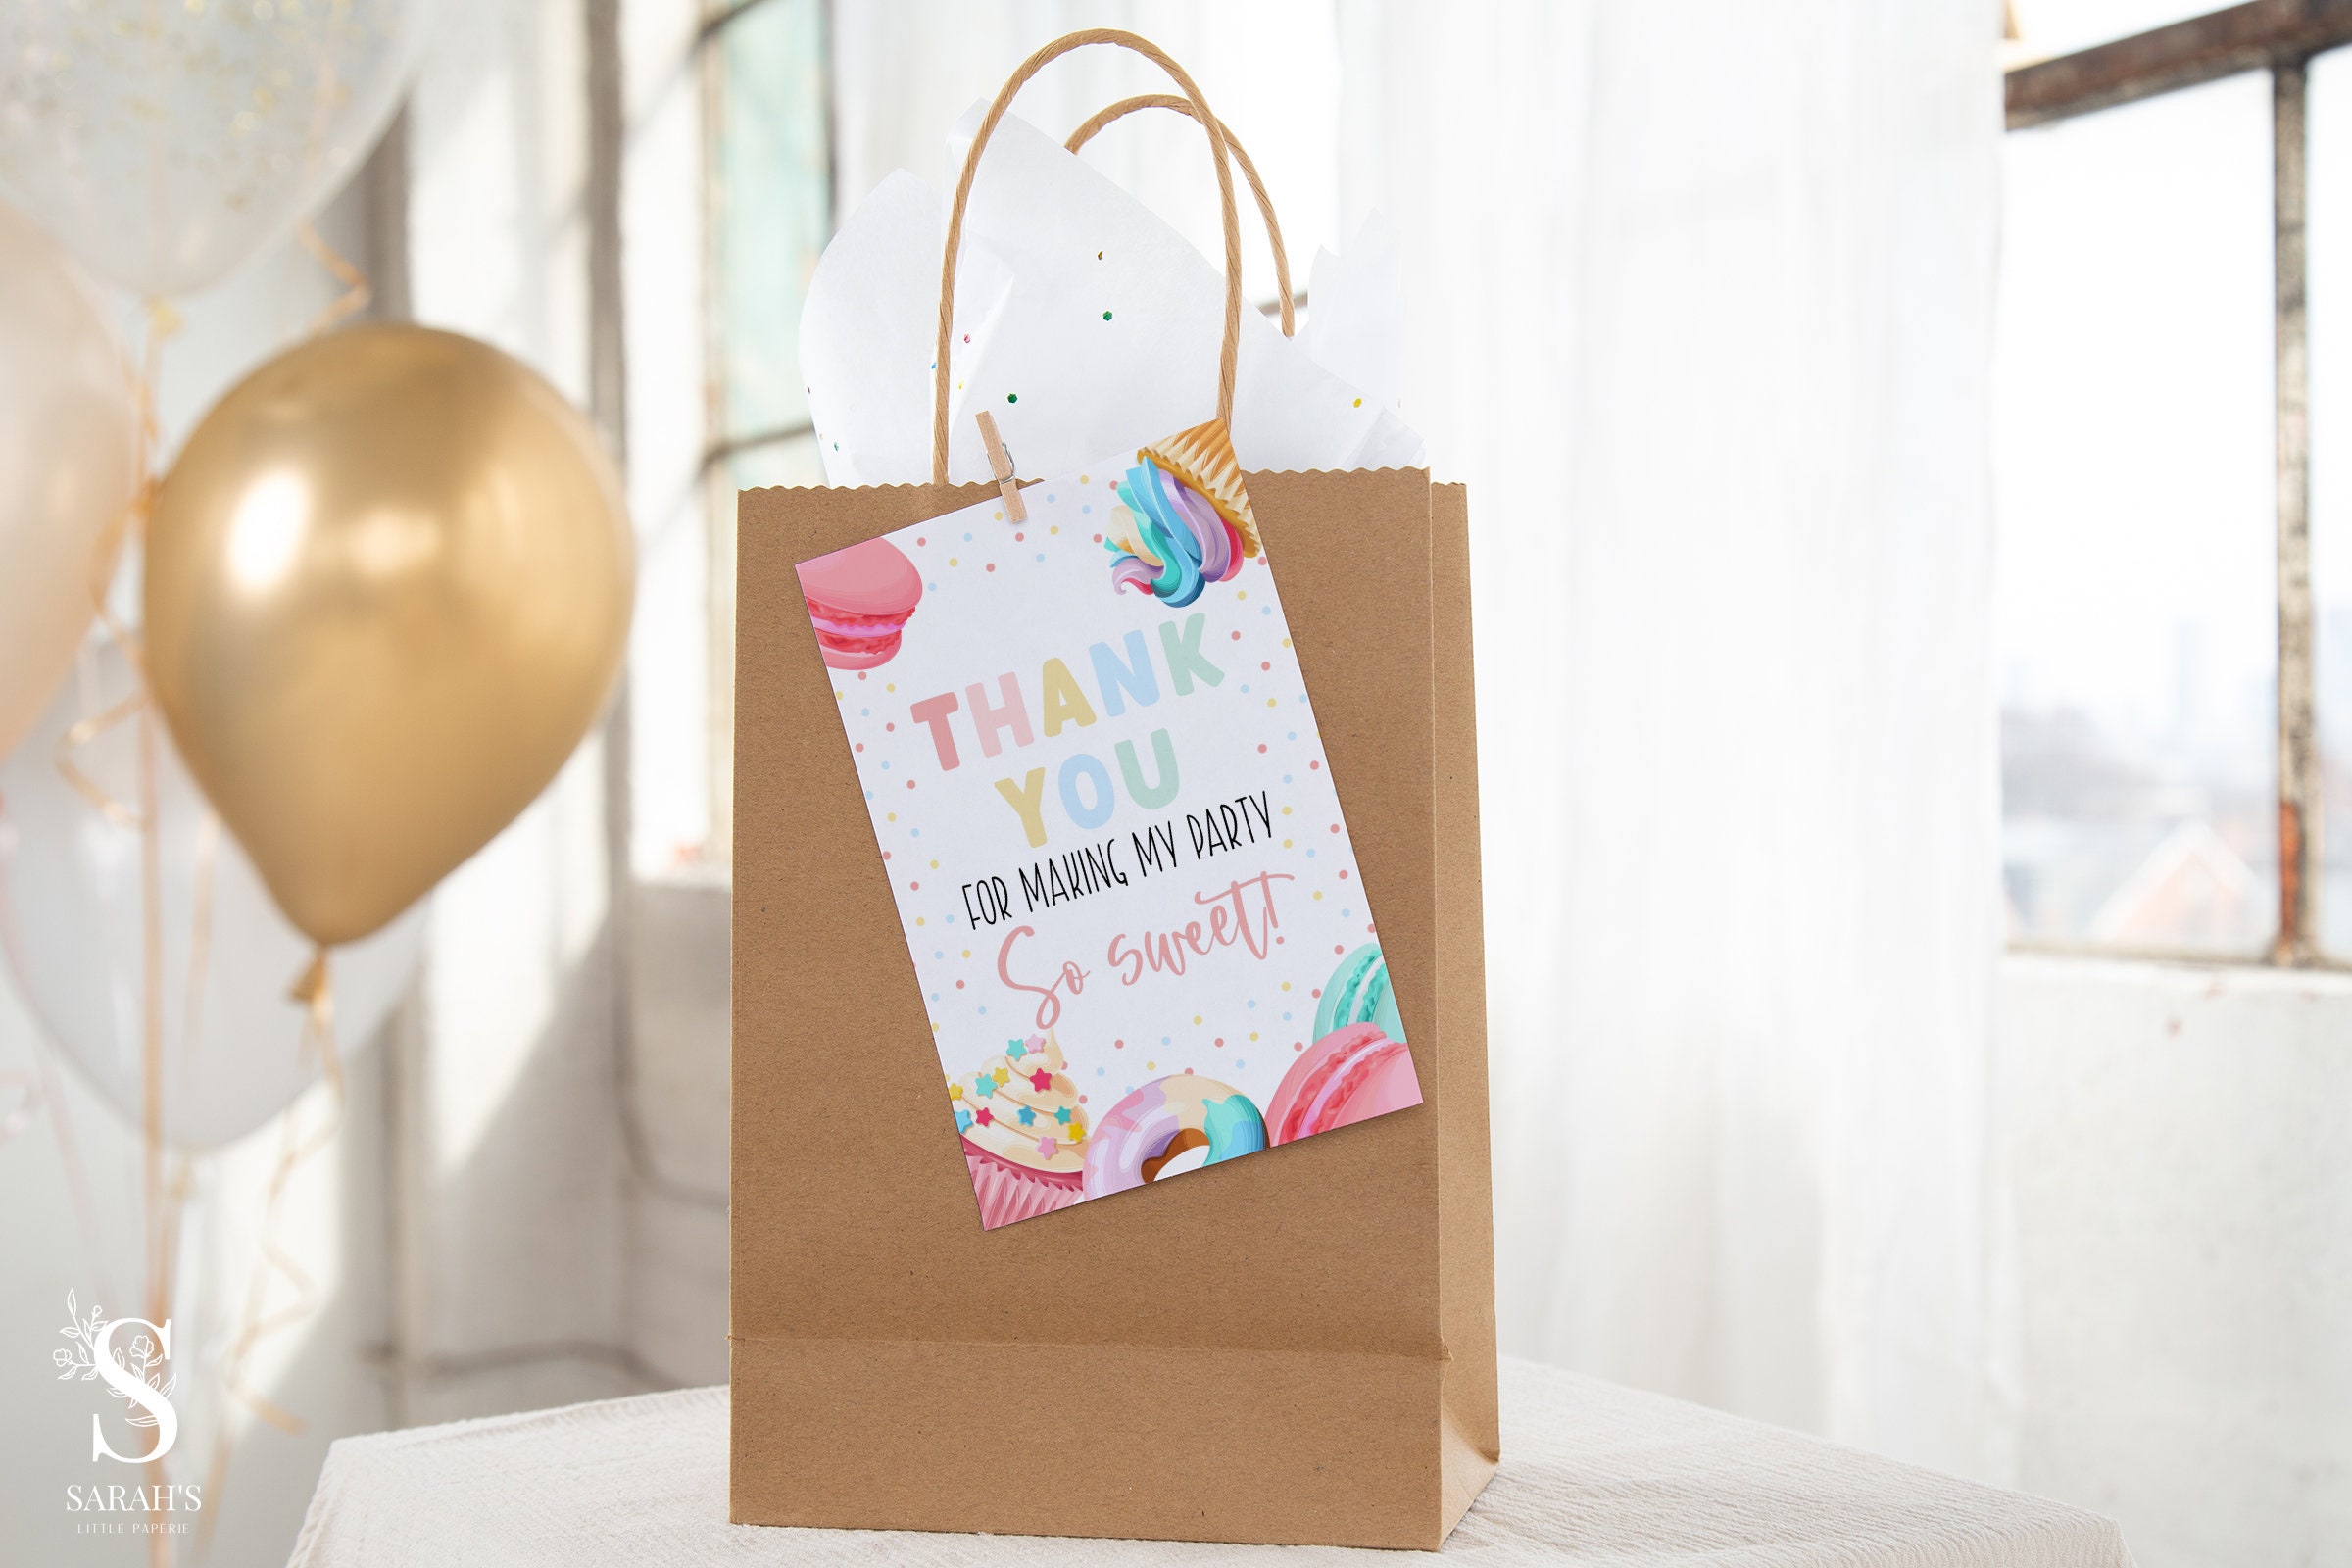  16 Pieces Slime Gift Bags for Slime Birthday Party